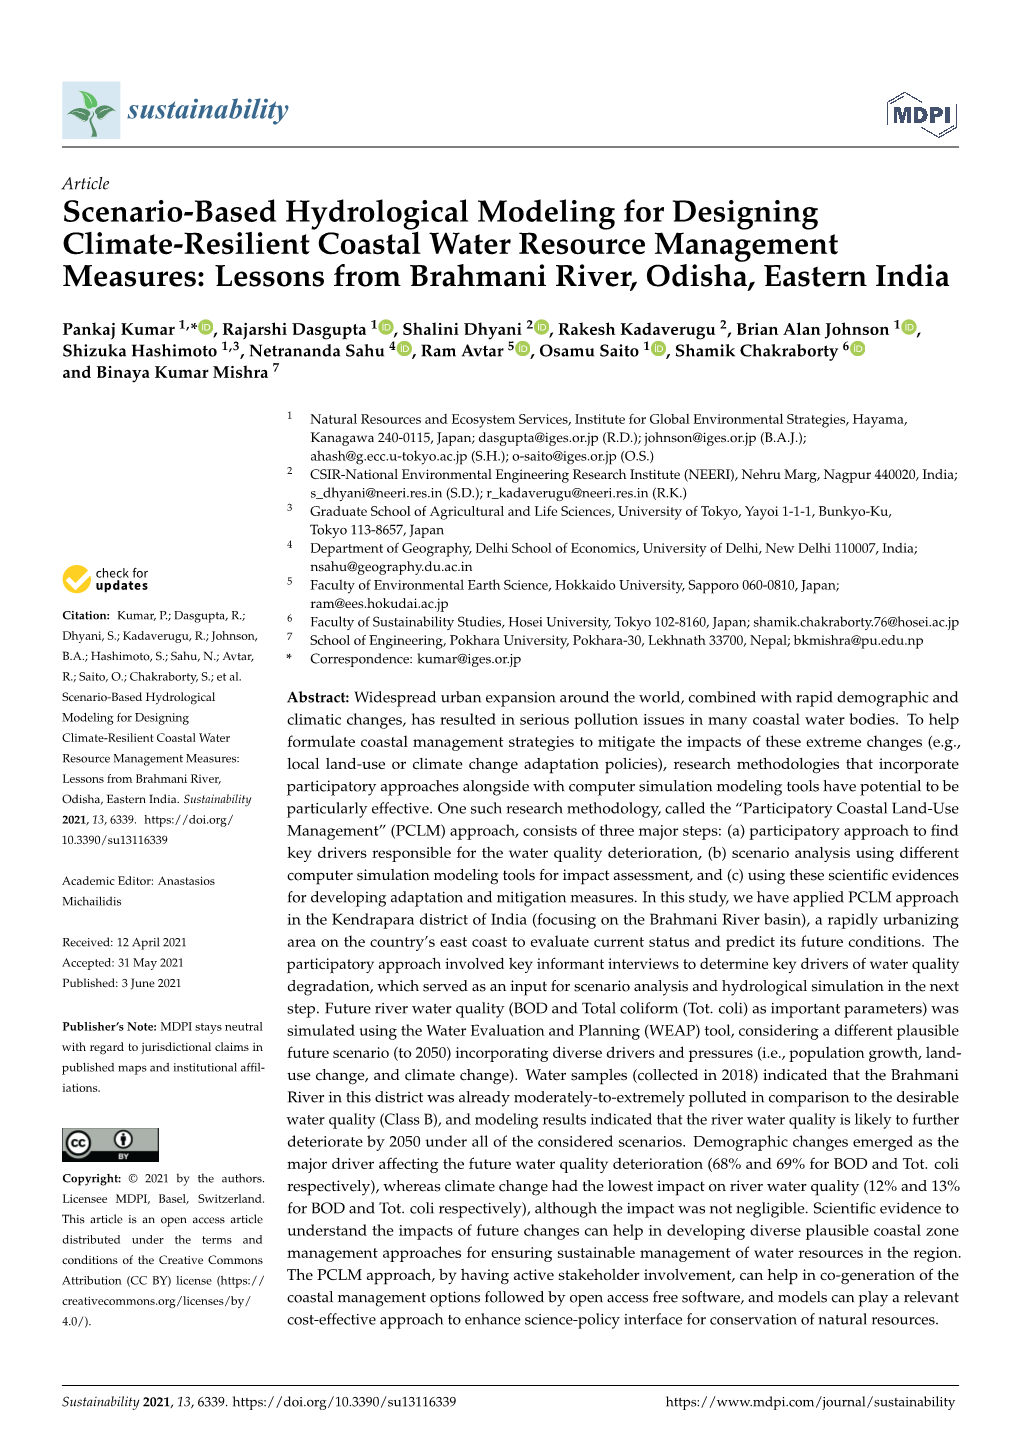 Scenario-Based Hydrological Modeling for Designing Climate-Resilient Coastal Water Resource Management Measures: Lessons from Brahmani River, Odisha, Eastern India